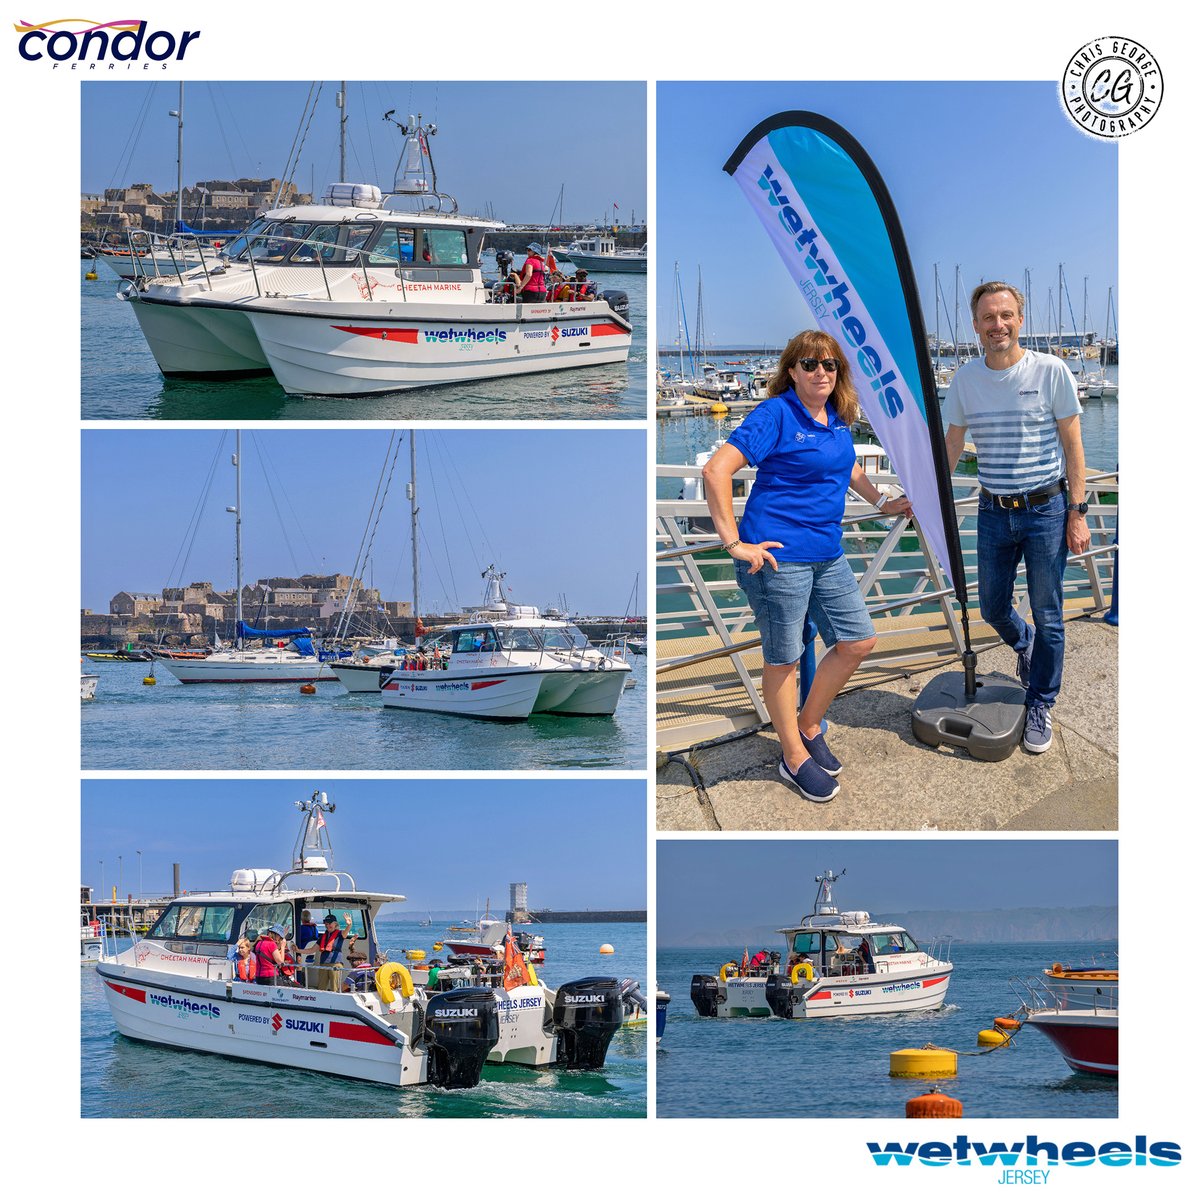 Through our Community Fund, we have funded a number of boat trips recently from Guernsey on a disabled-friendly boat run by the Jersey charity, WetWheels. #community #charity